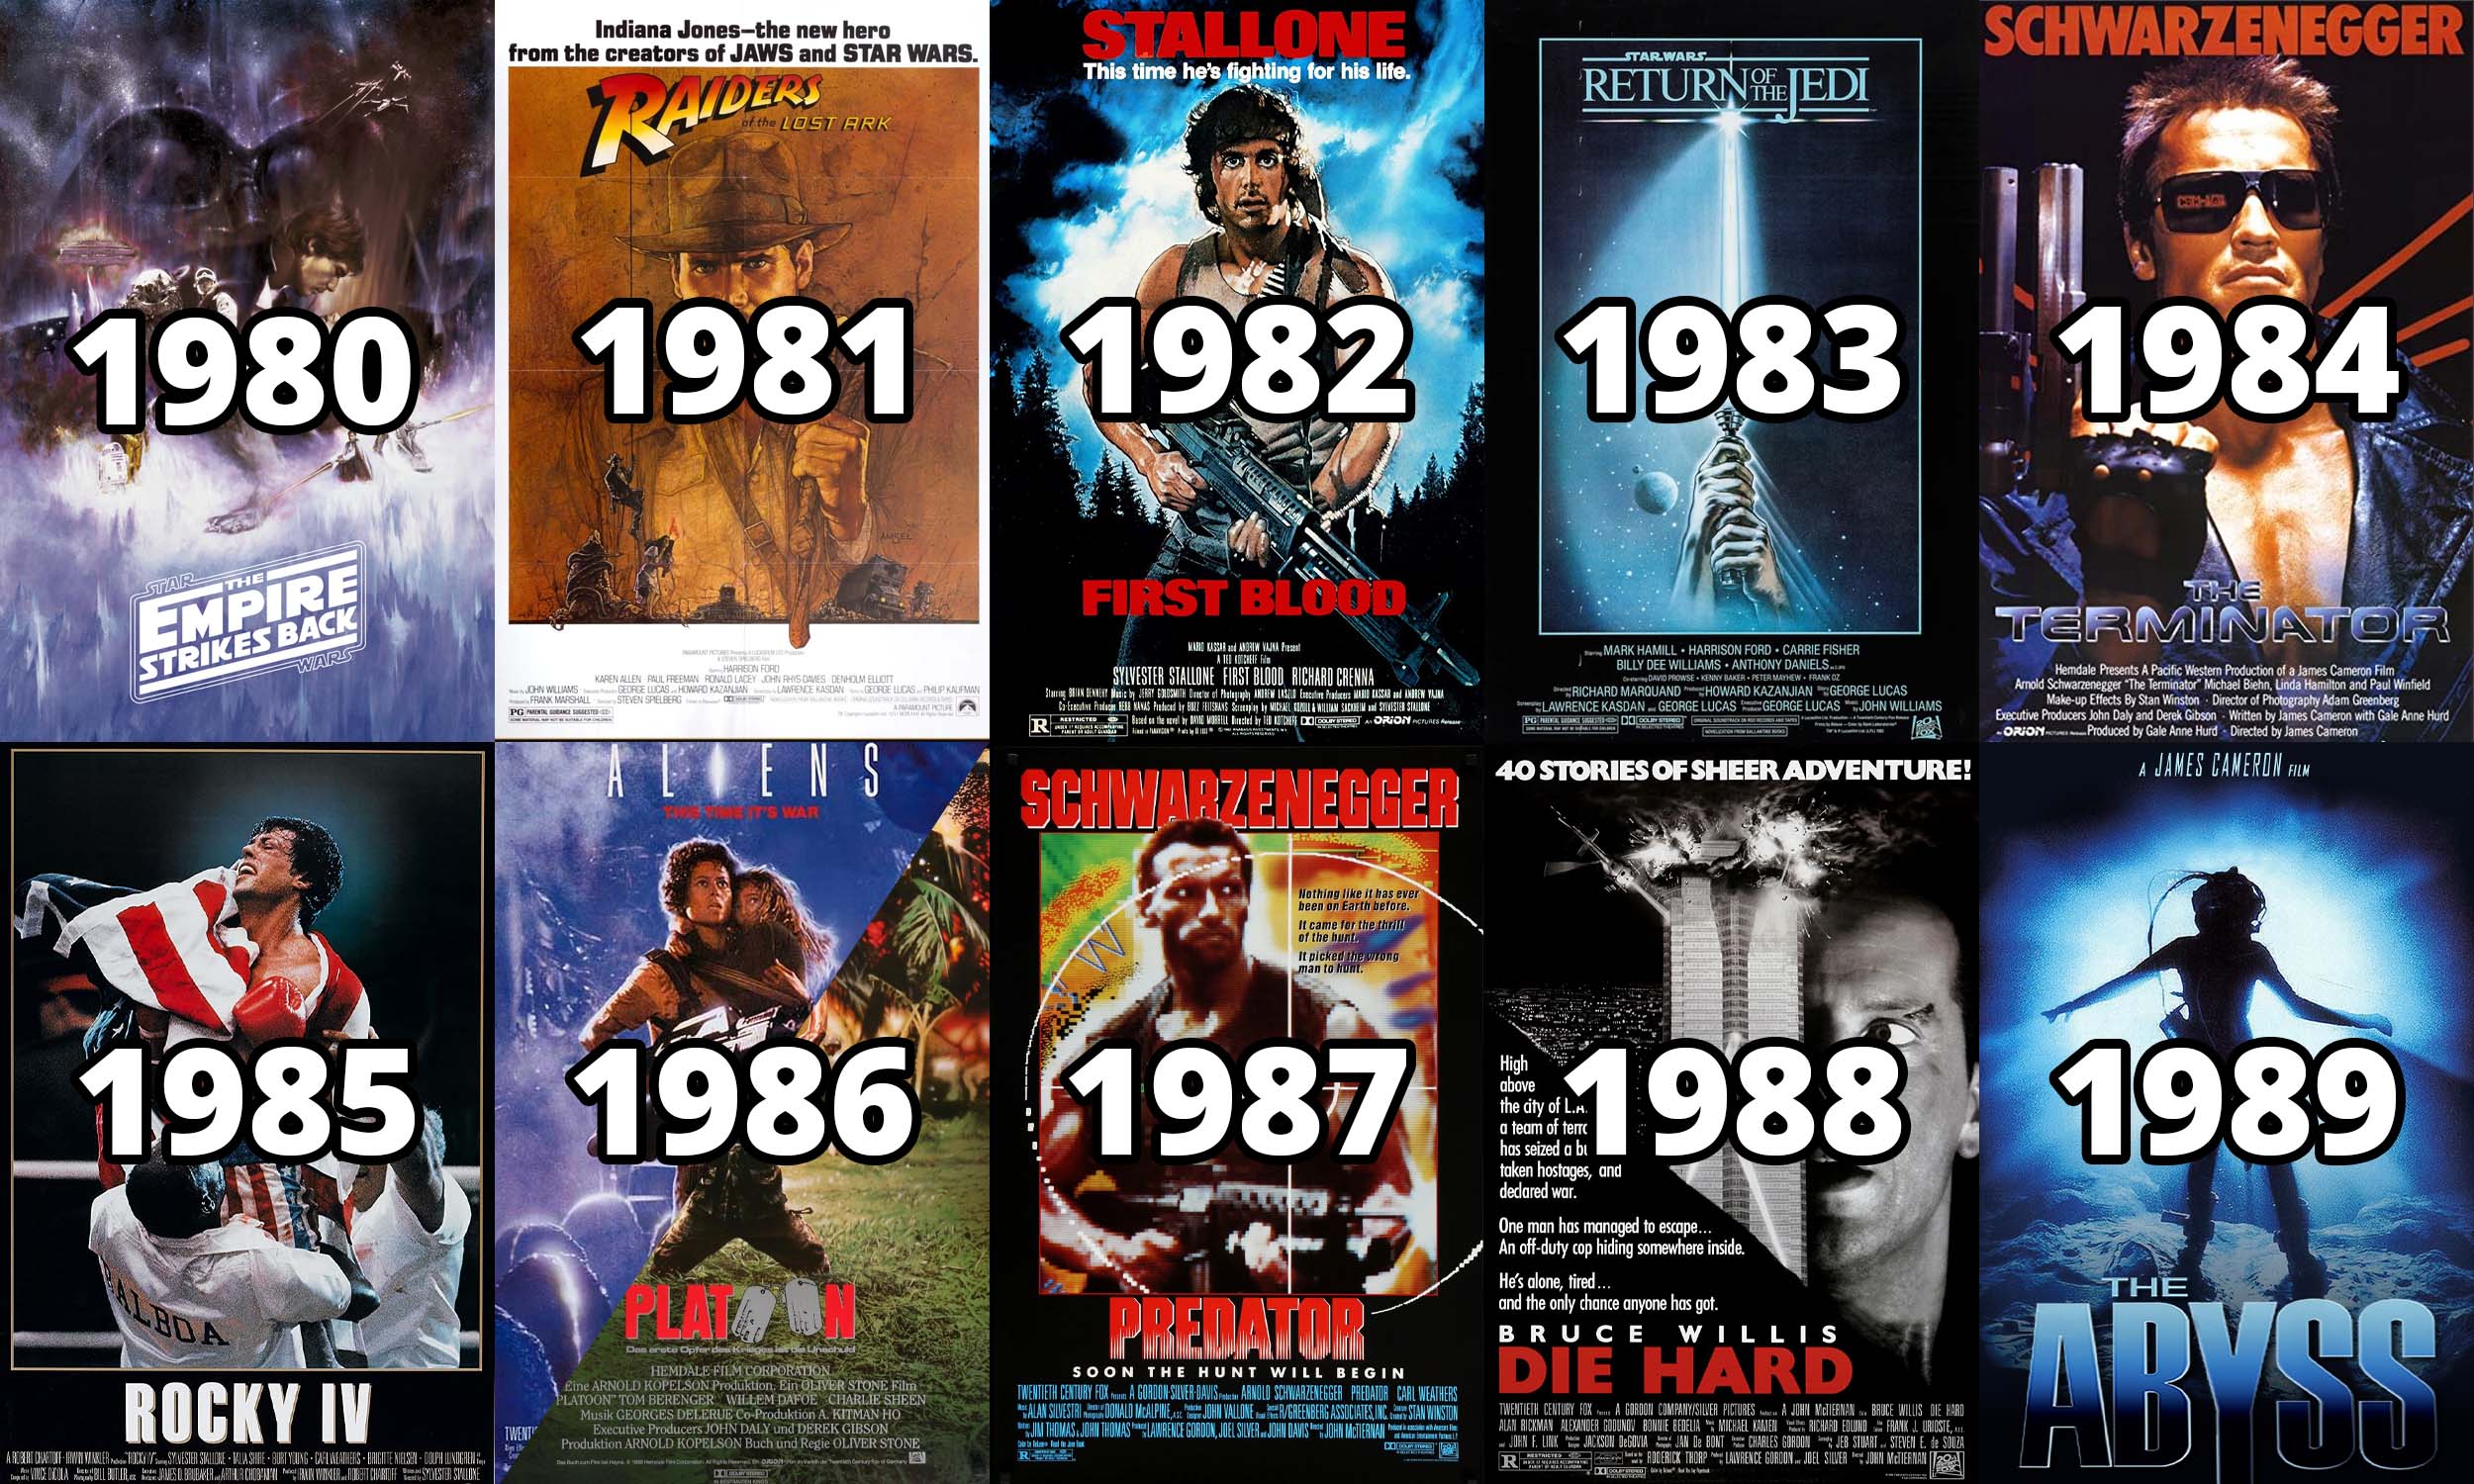 What Decade Had The Best Movies? | Movie/TV Board